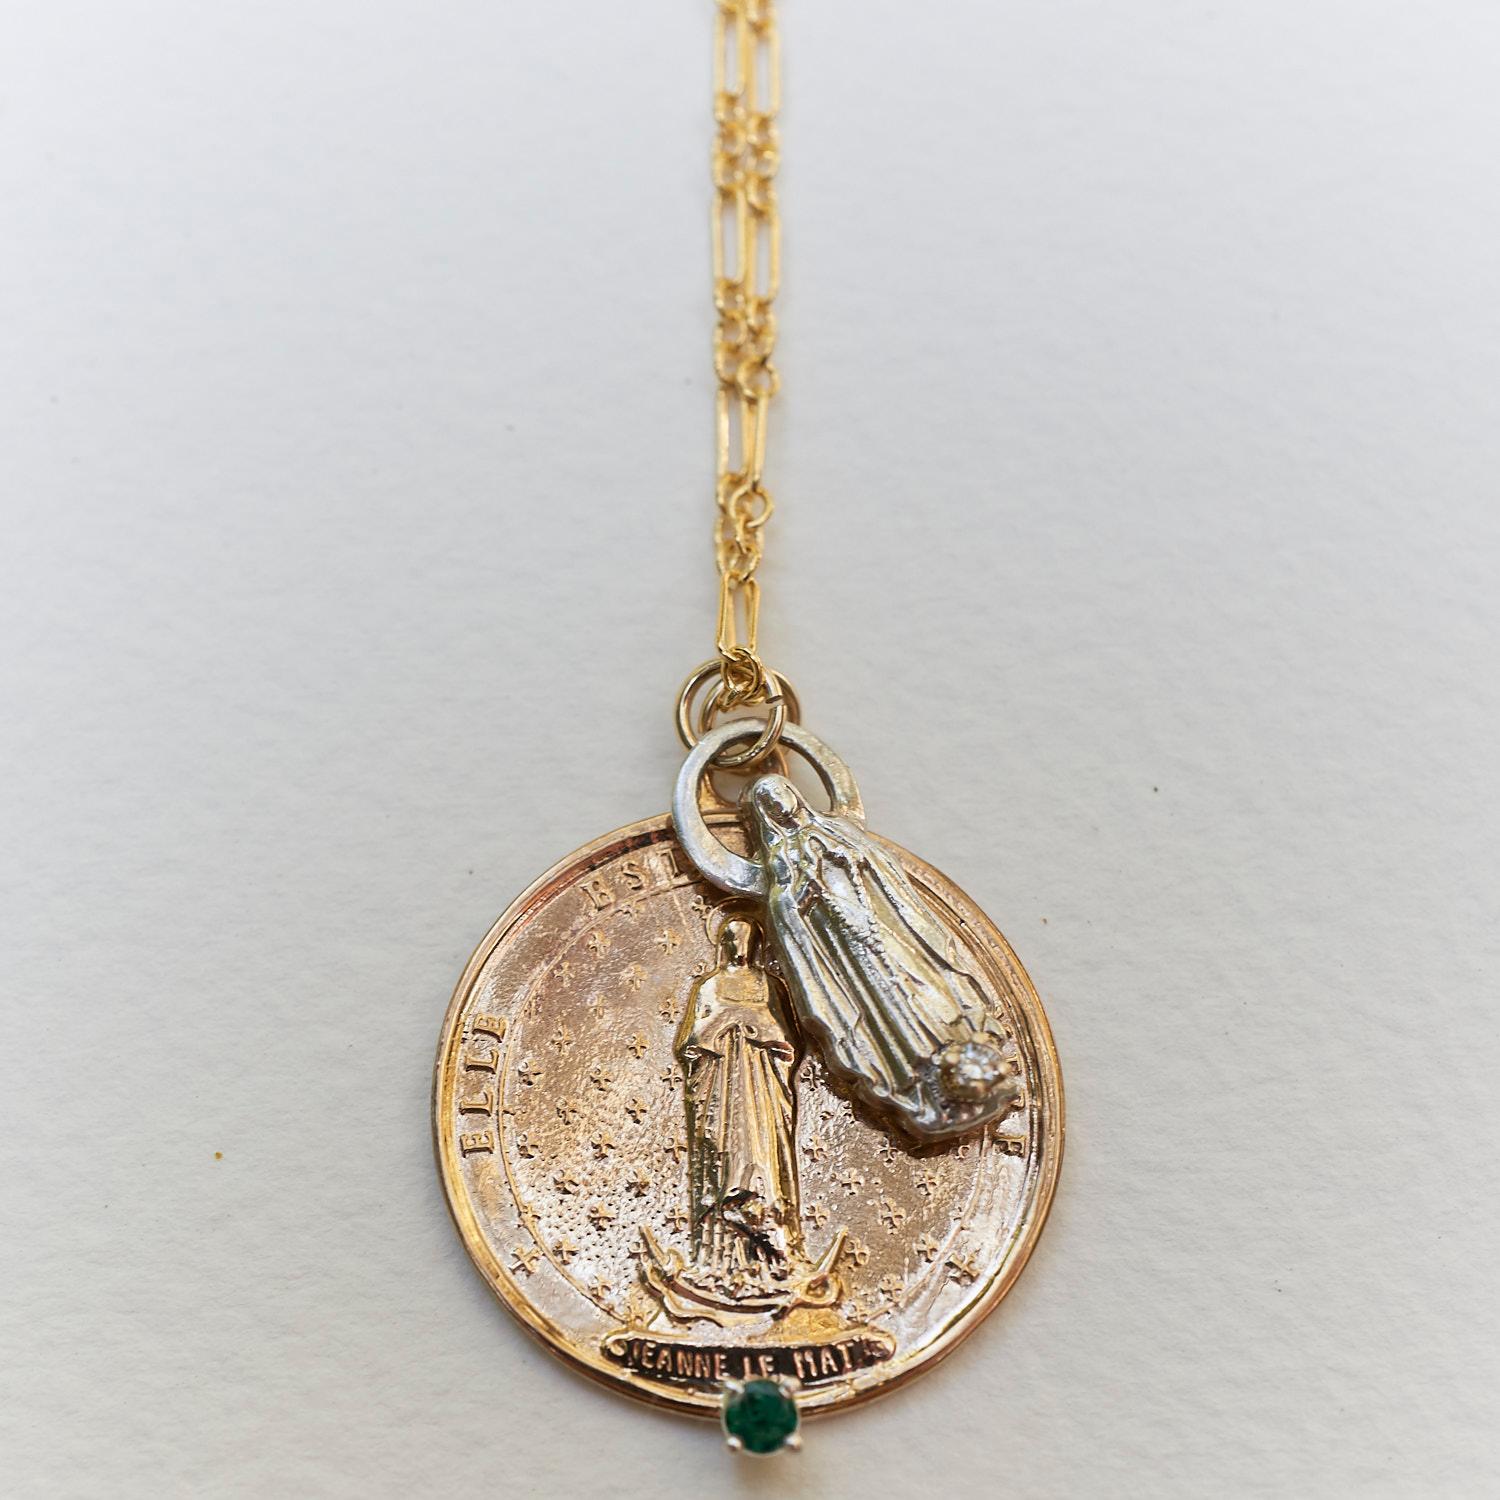 Emerald White Diamond Chunky Chain 24' Long Necklace Medals Silver Bronze J Dauphin 

French Spiritual Medal Pendant with Jeanne Le Mat in Bronze Embellished with a Green Emerald and combined with a solid Silver Pendant Virgin Mary Figurine with a